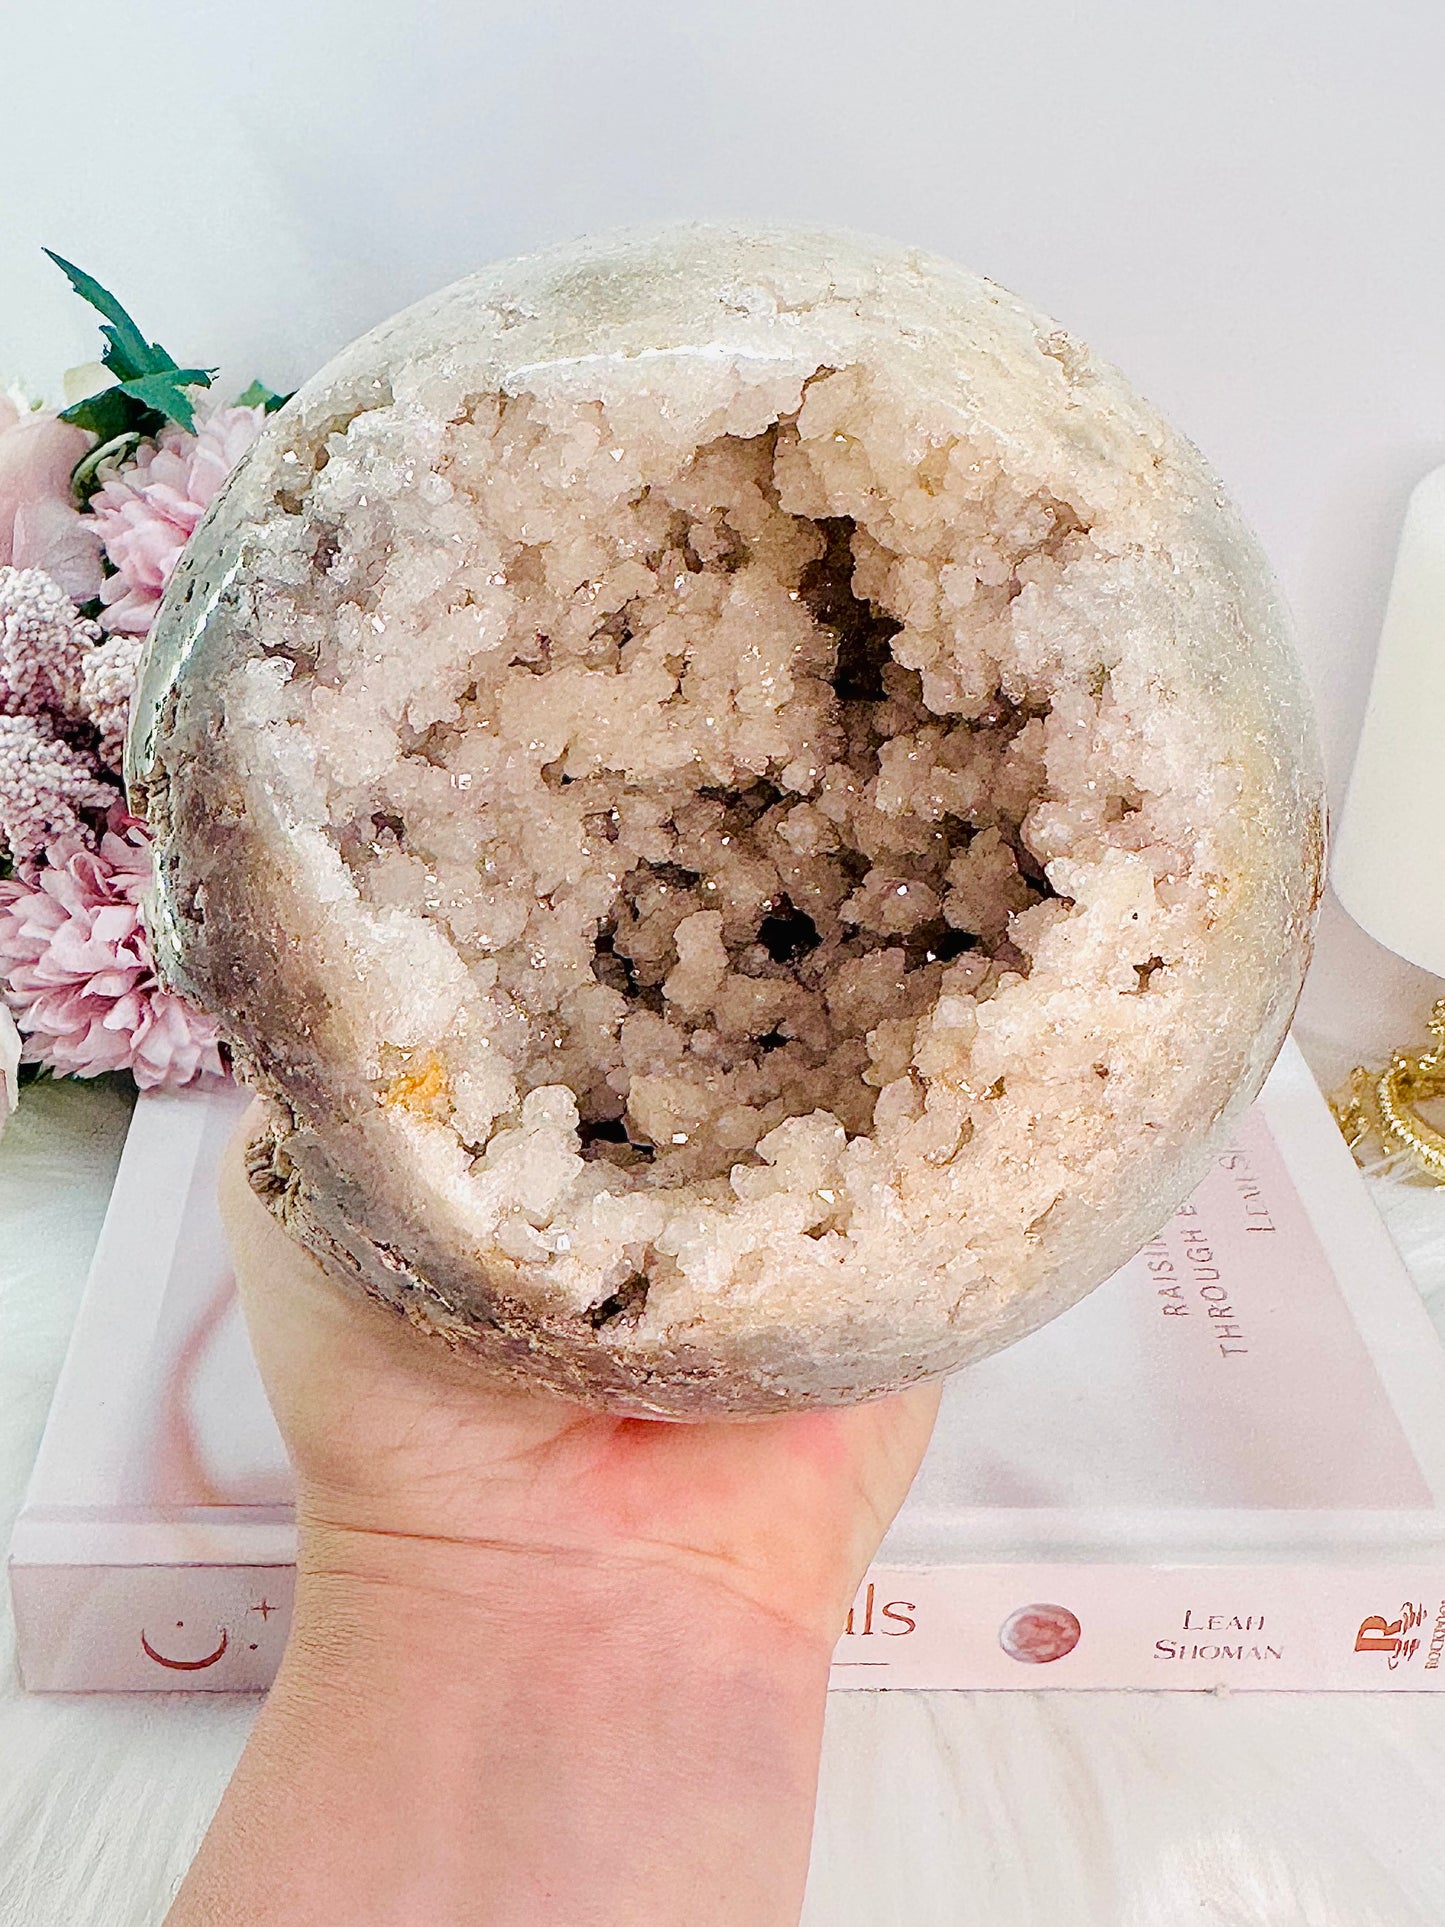 SHE IS THE QUEEN OF SPHERES !!! 
Classy & Fabulous HUGE 1.72KG 12cm Sparkling Stunning Pink Amethyst Druzy Sphere From Brazil Comes With A Stand